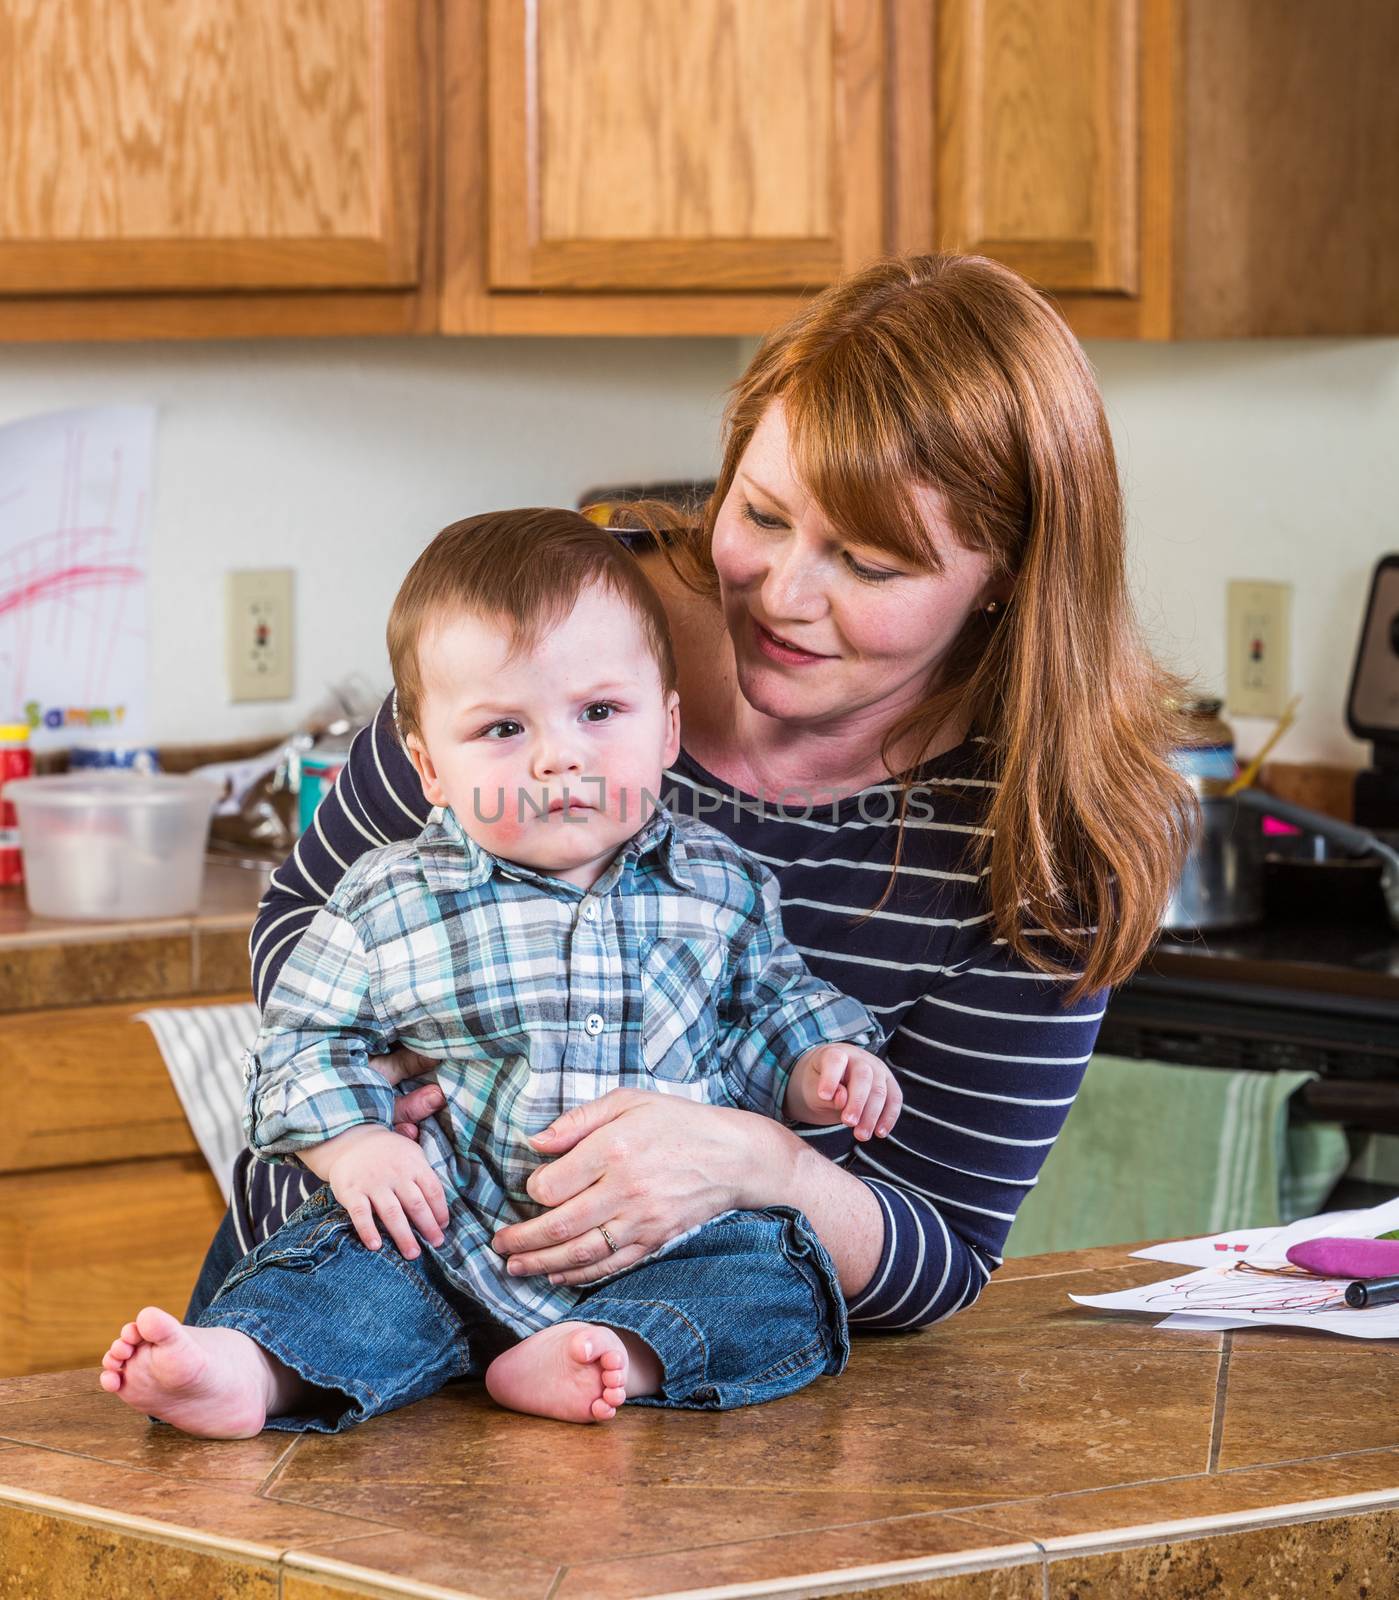 A woman in the kitchen poses with her baby